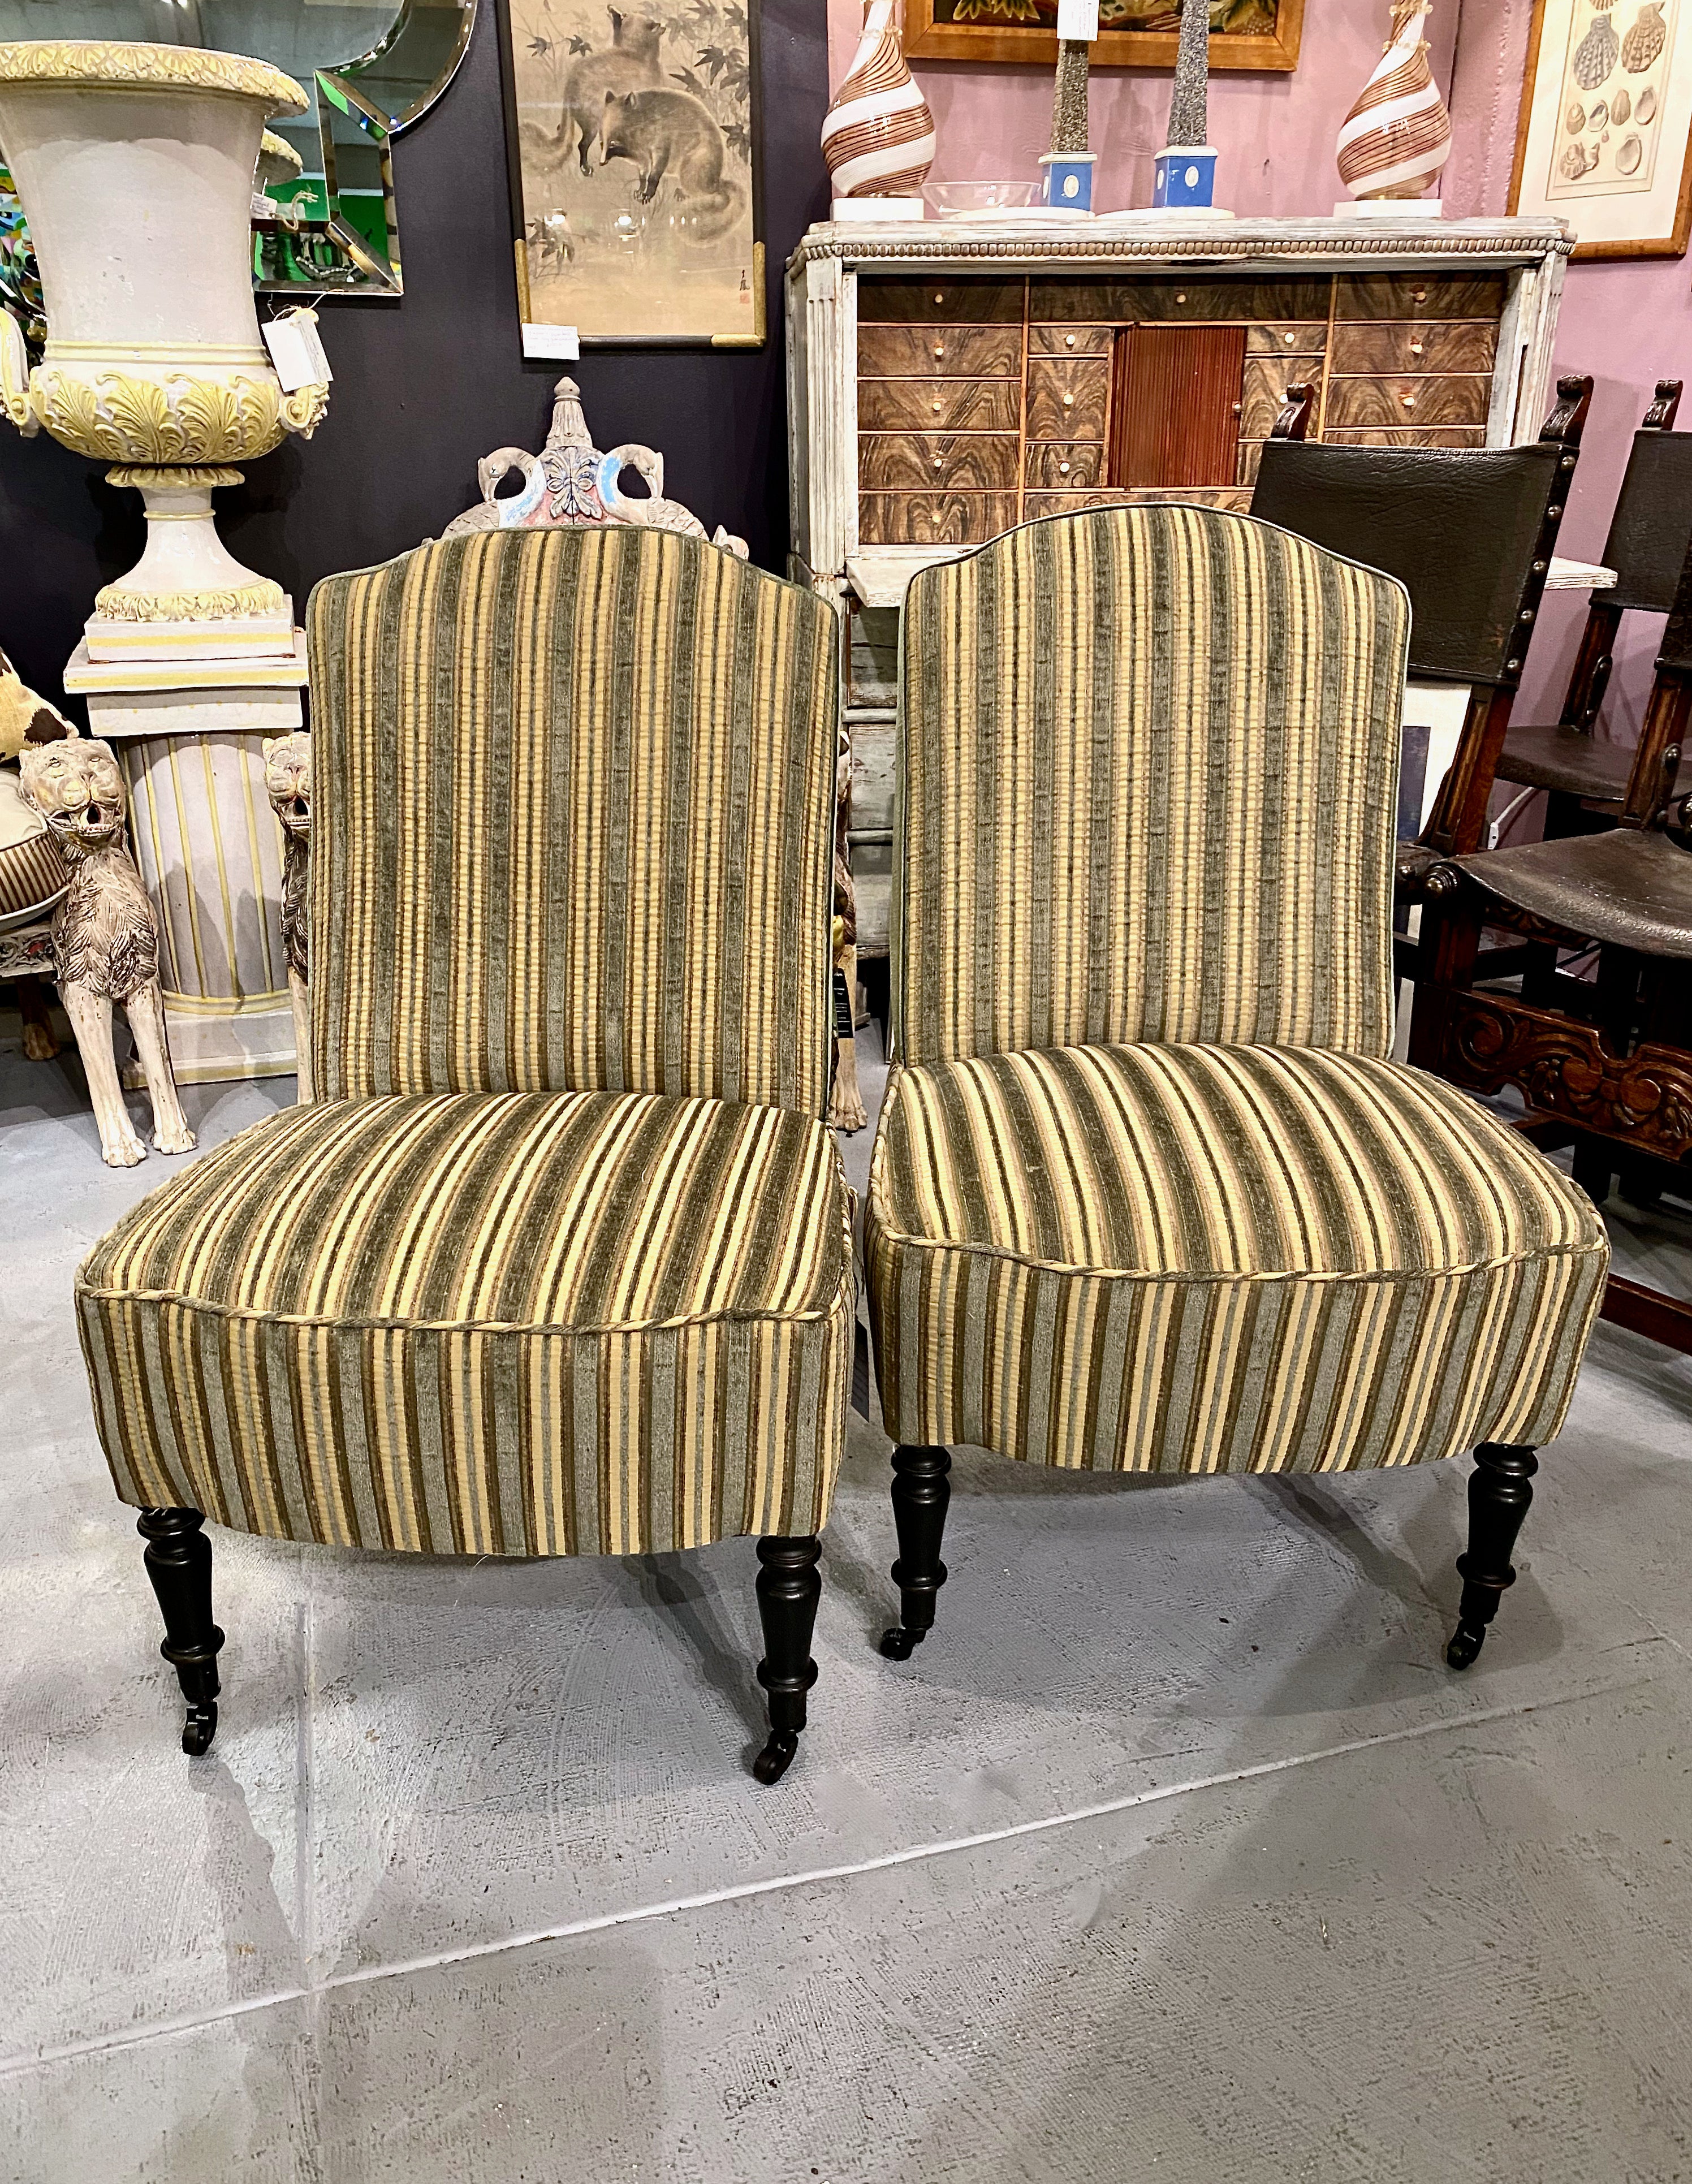 This is a superb pair of period Napoleon III Chauffeuses or Slipper Chairs that date to c. 1860-1875. The chairs feature arched back crests with tightly upholstered seats and backs. The chairs are newly upholstered in a high end Clarence House